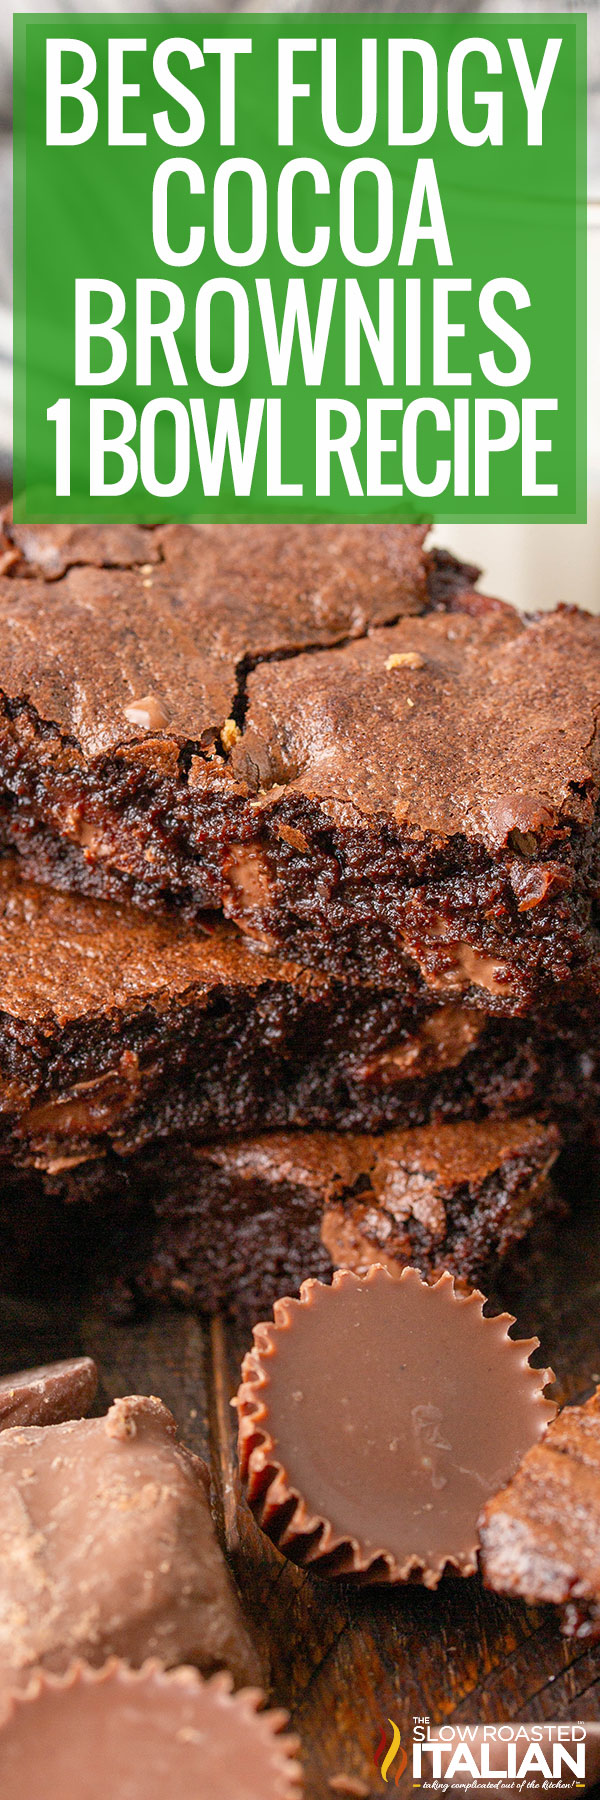 Best Fudgy Cocoa Brownies (One Bowl Recipe) - PIN